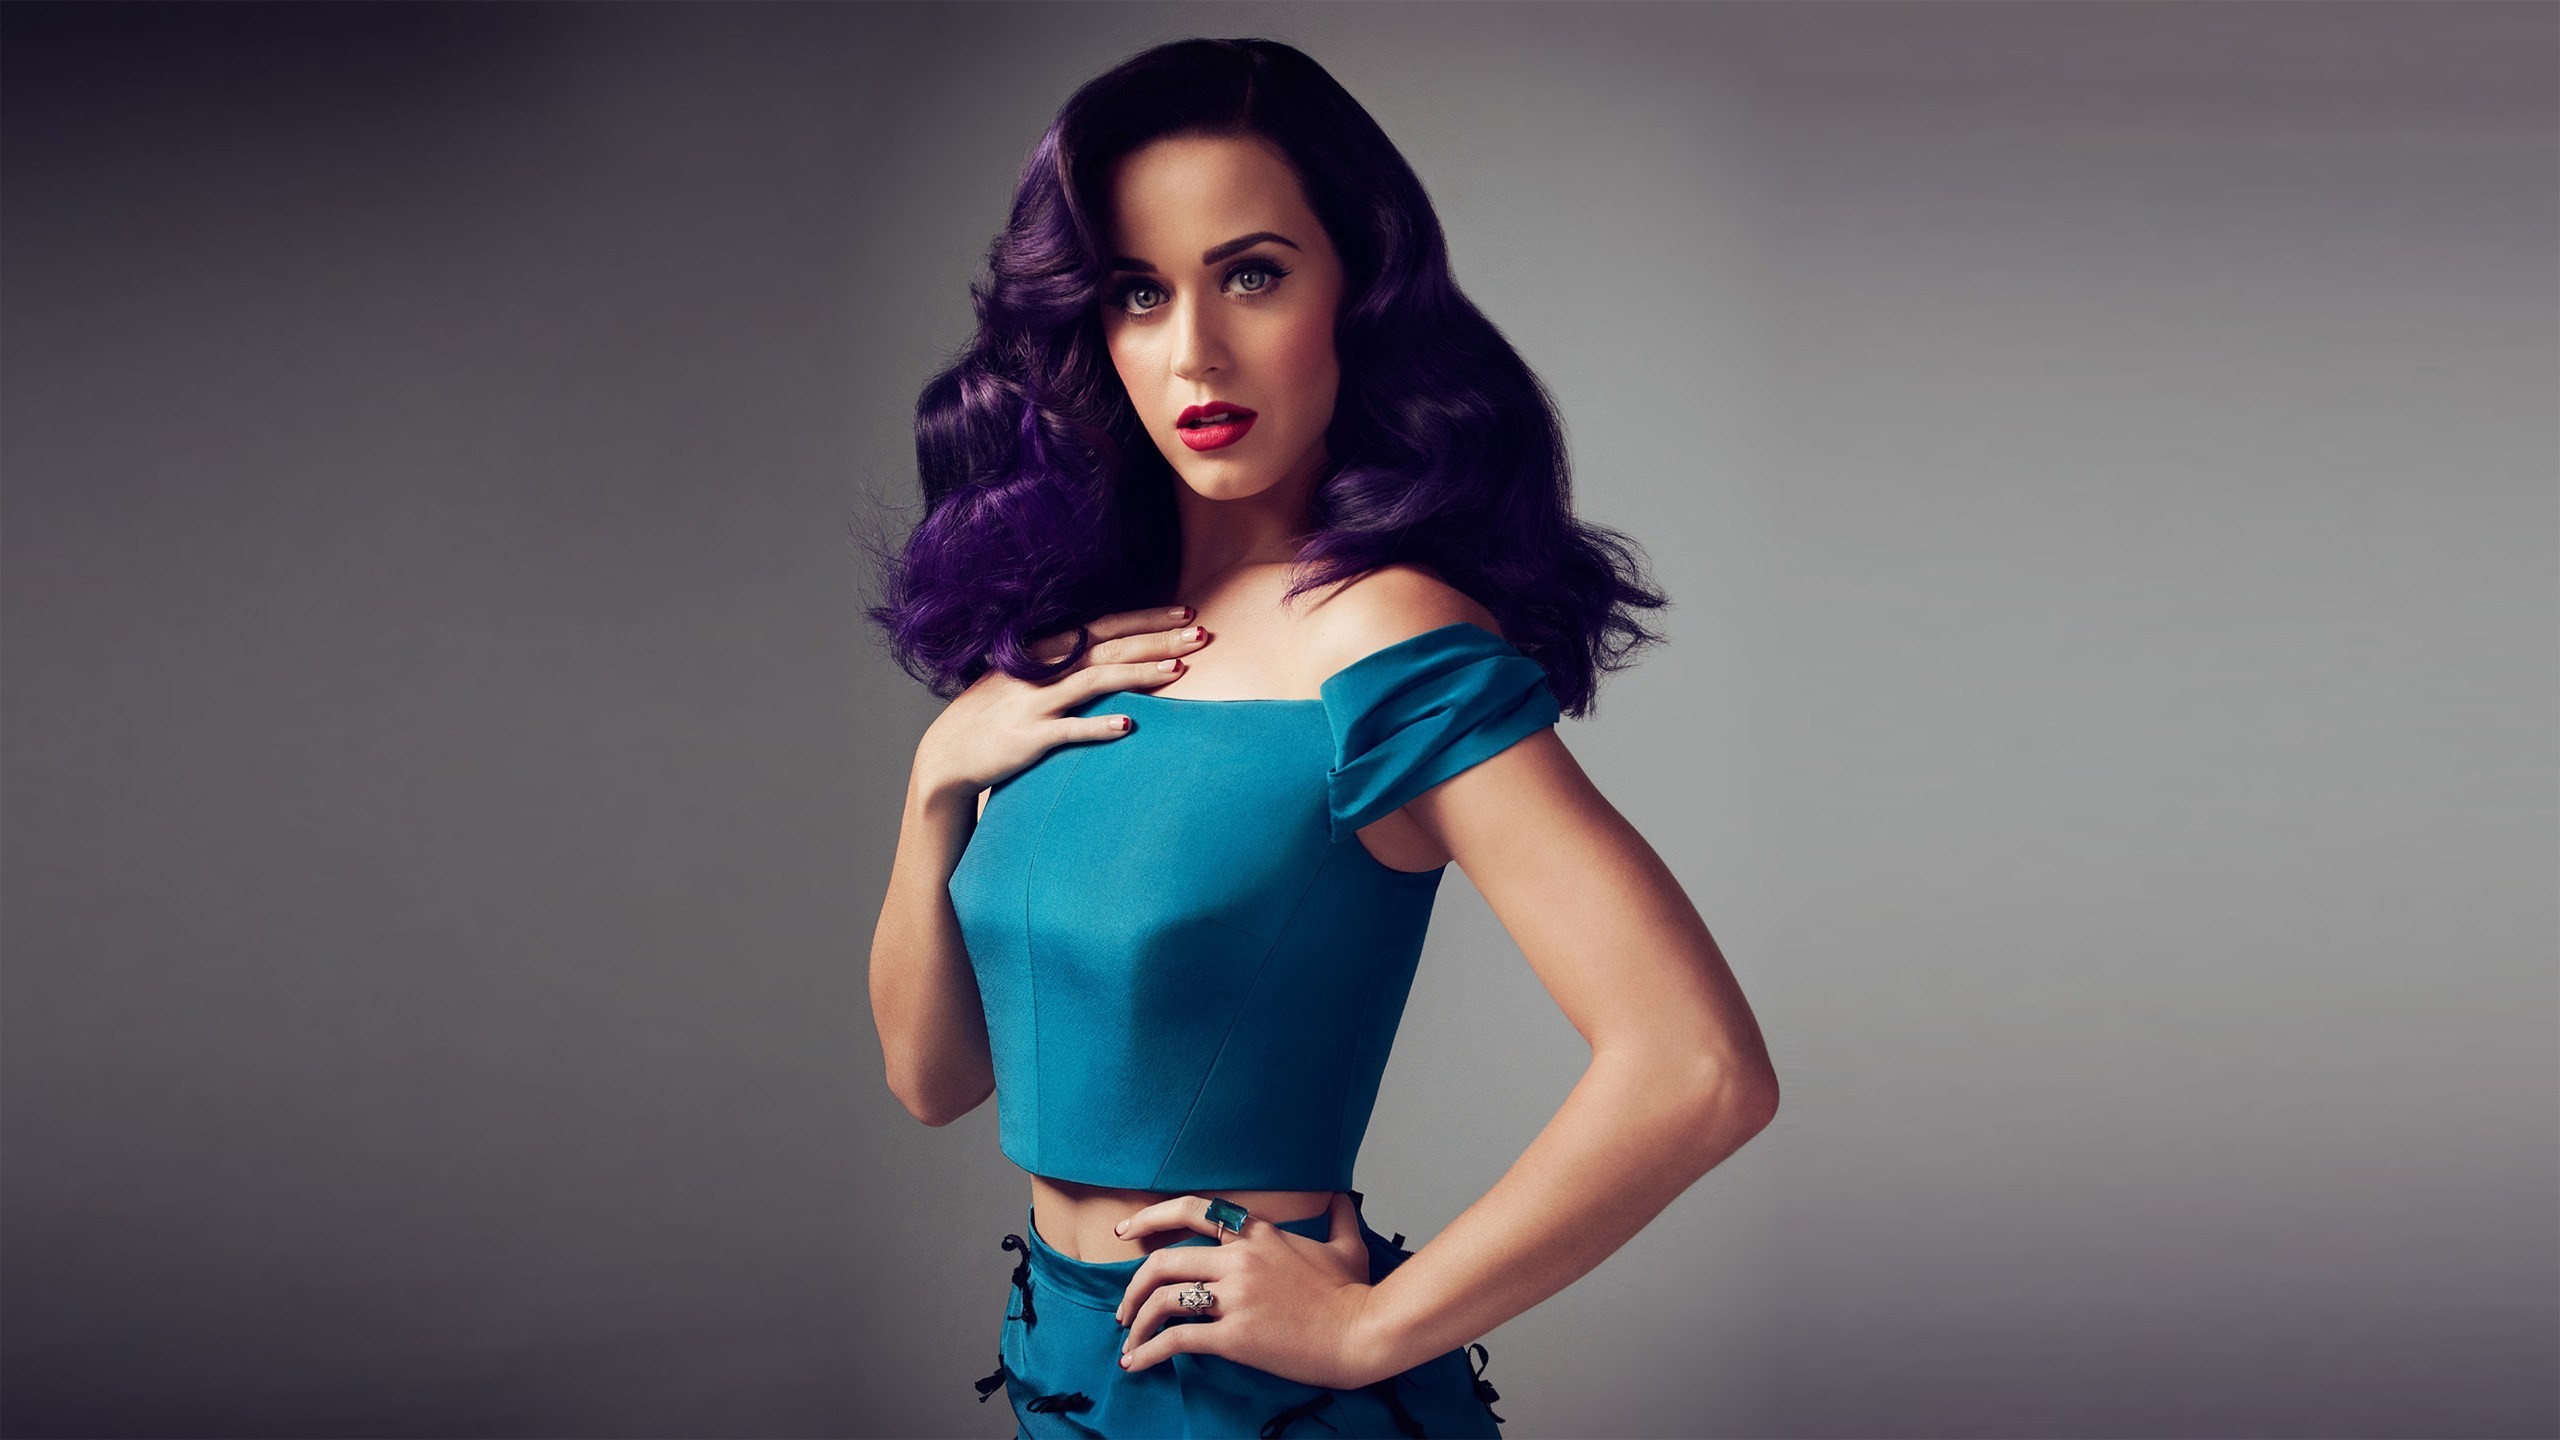 2560x1440 Katy Perry Images Hd Wallpaper